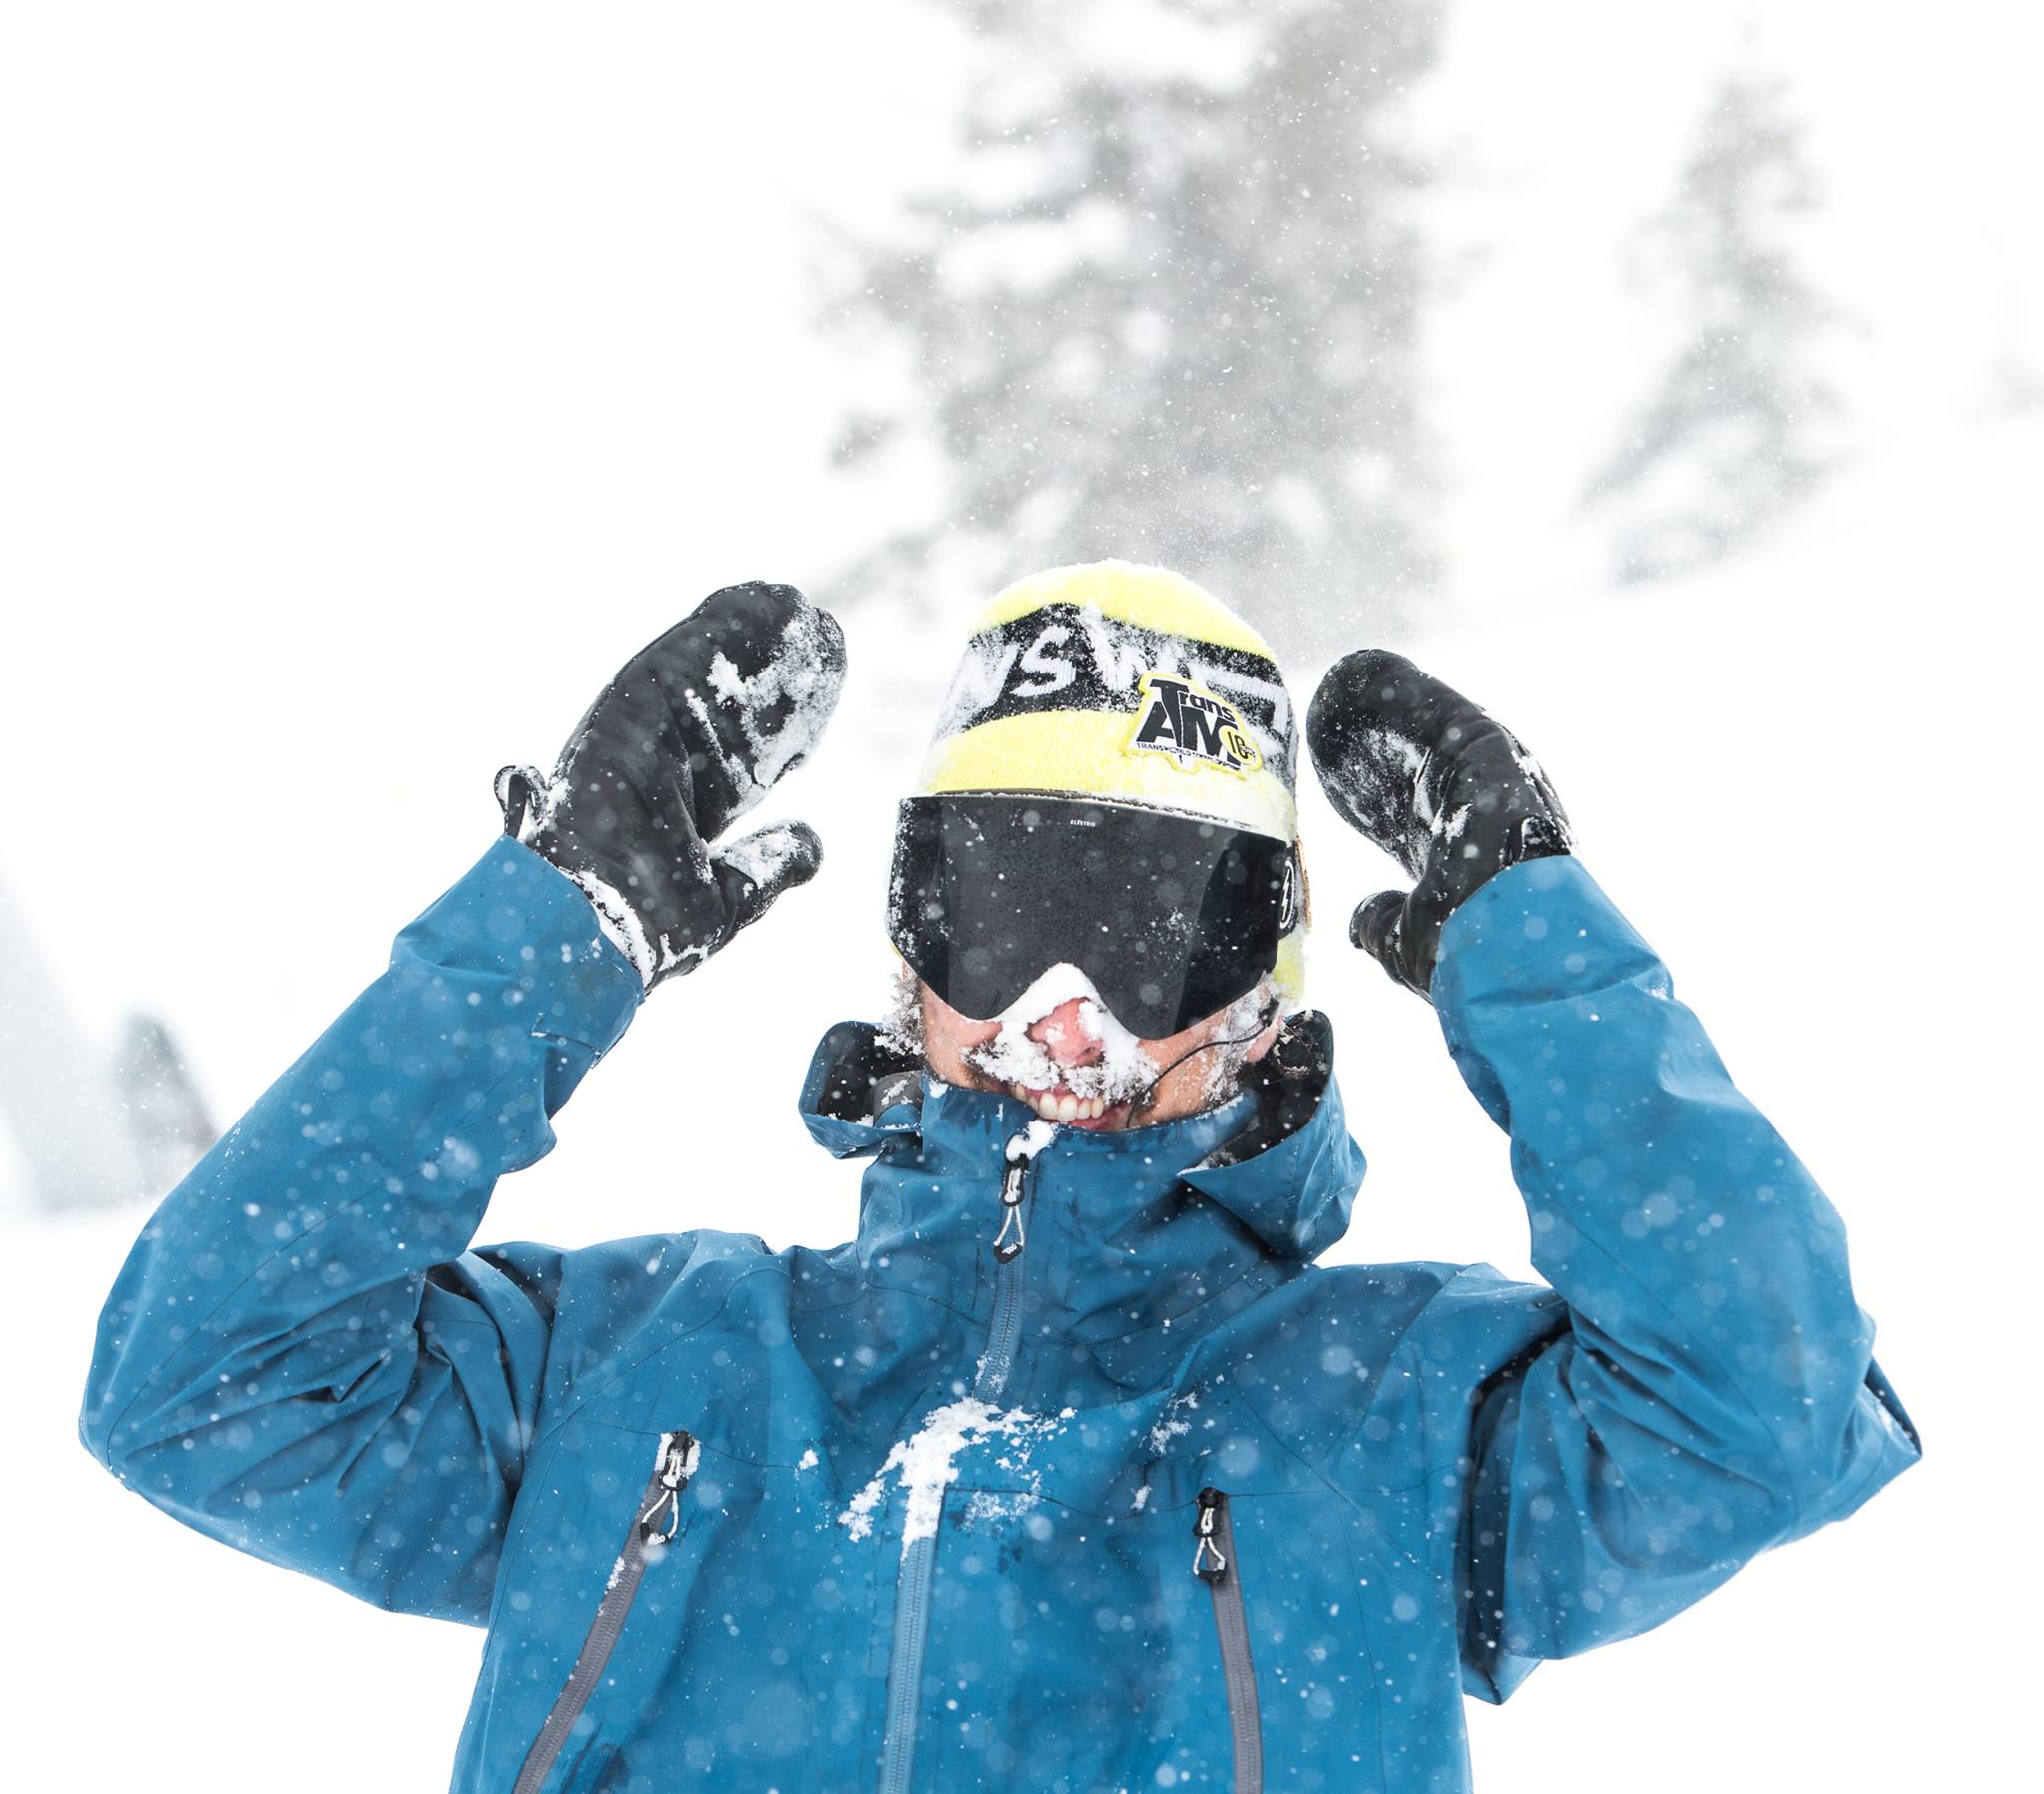 Resort reports it is staying open until 7th July 2019., Squaw Valley